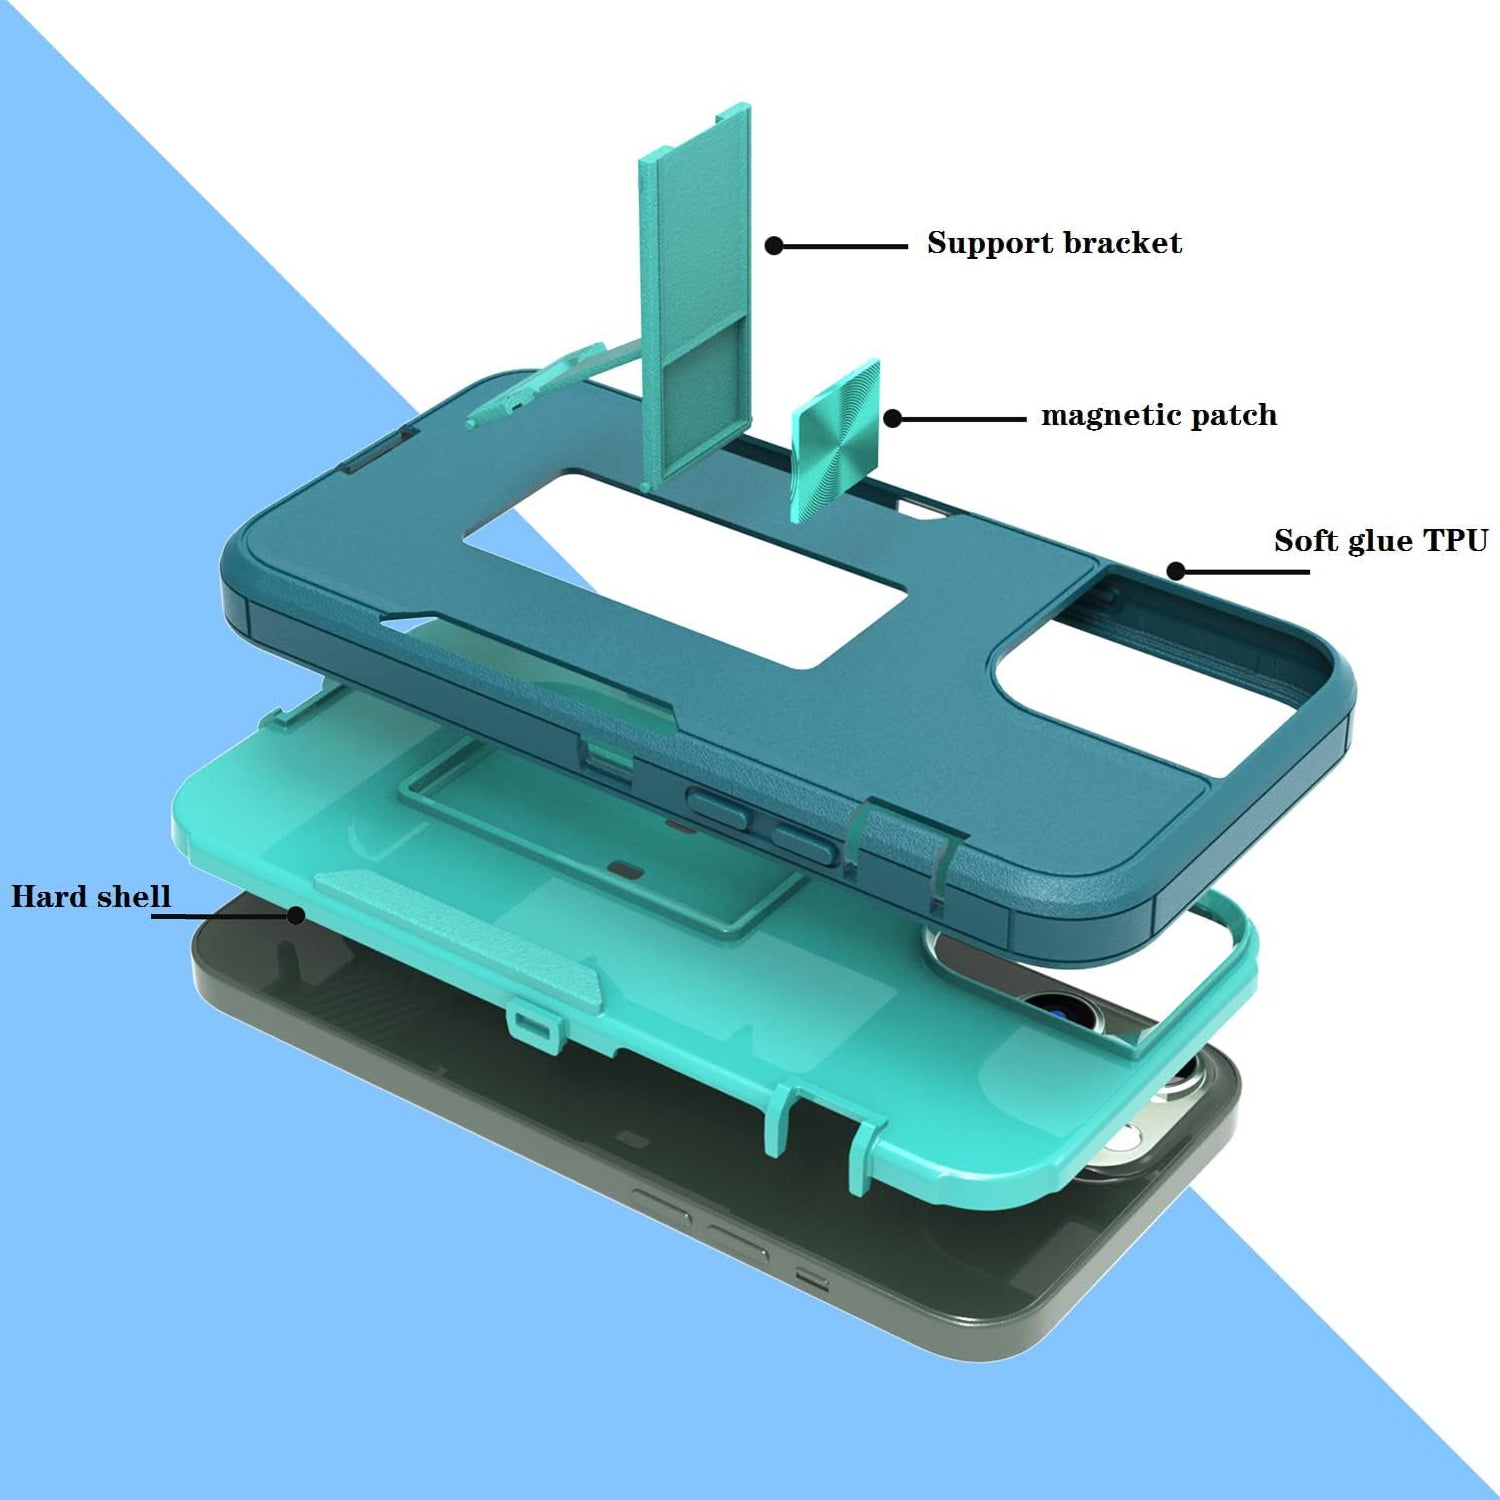 iPhone 11 (6.1’’) Kickstand fully protected heavy-duty shockproof case